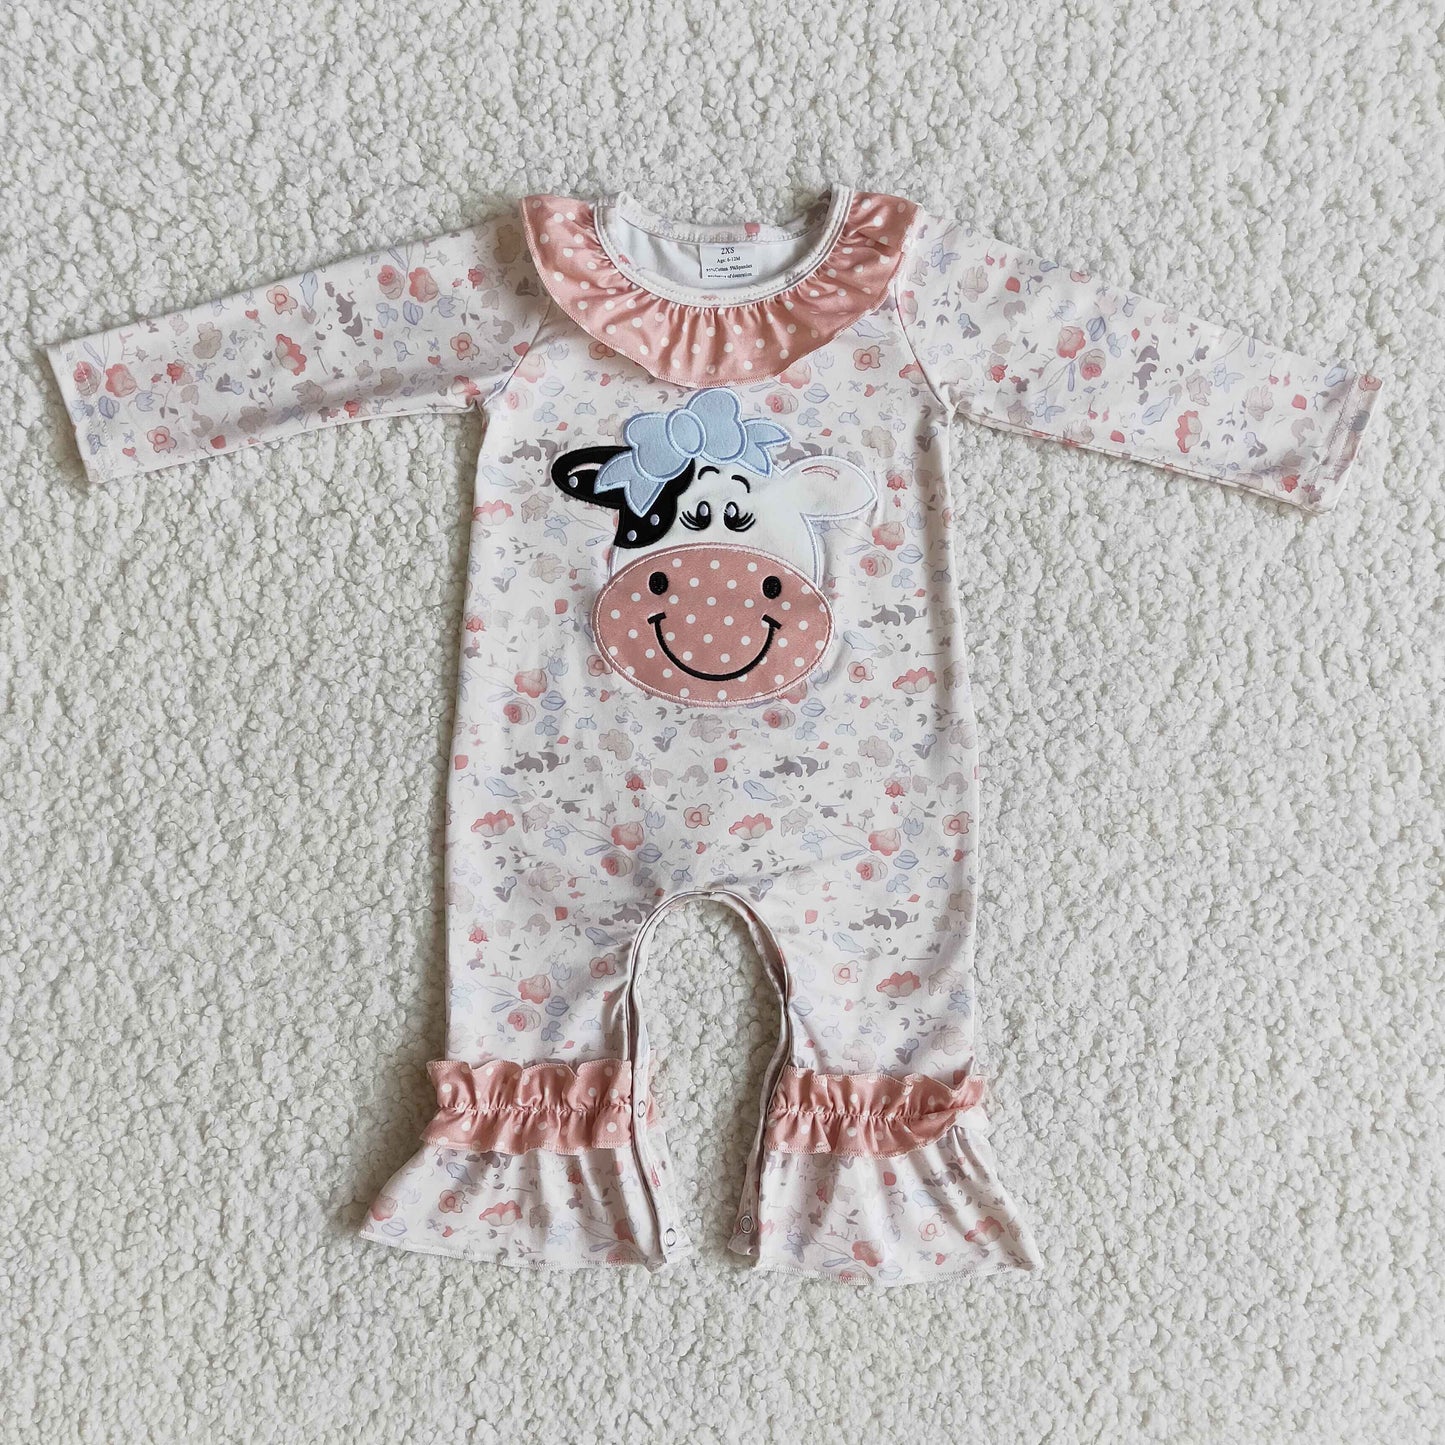 infants long sleeve romper with embroidery milk cow print